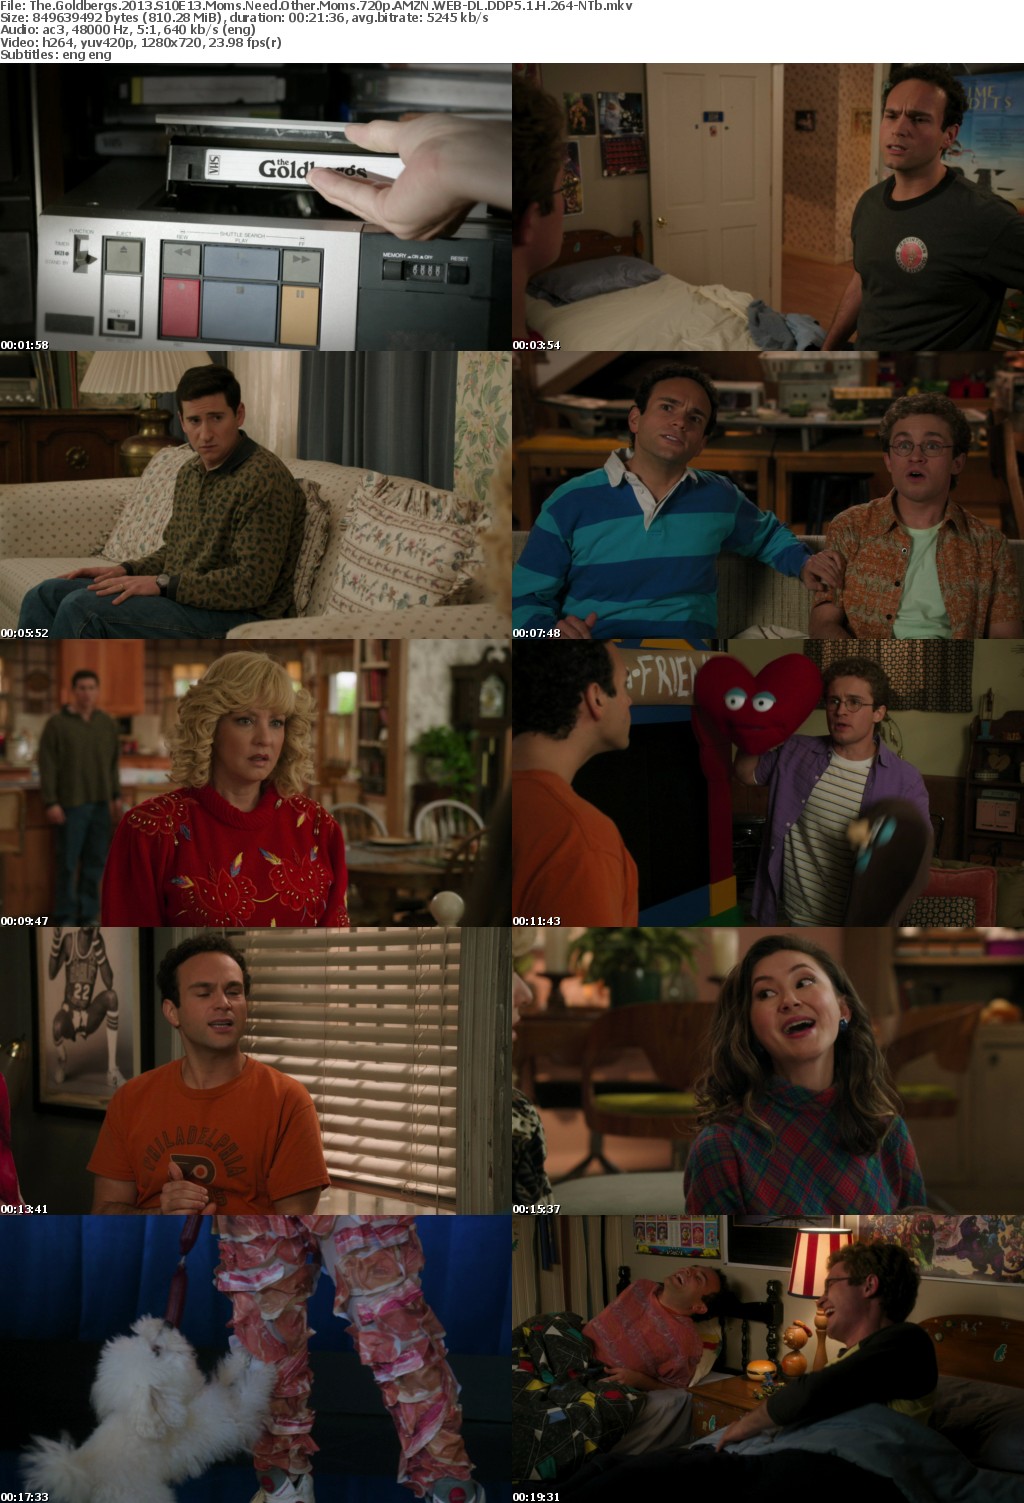 The Goldbergs 2013 S10E13 Moms Need Other Moms 720p AMZN WEBRip DDP5 1 x264-NTb